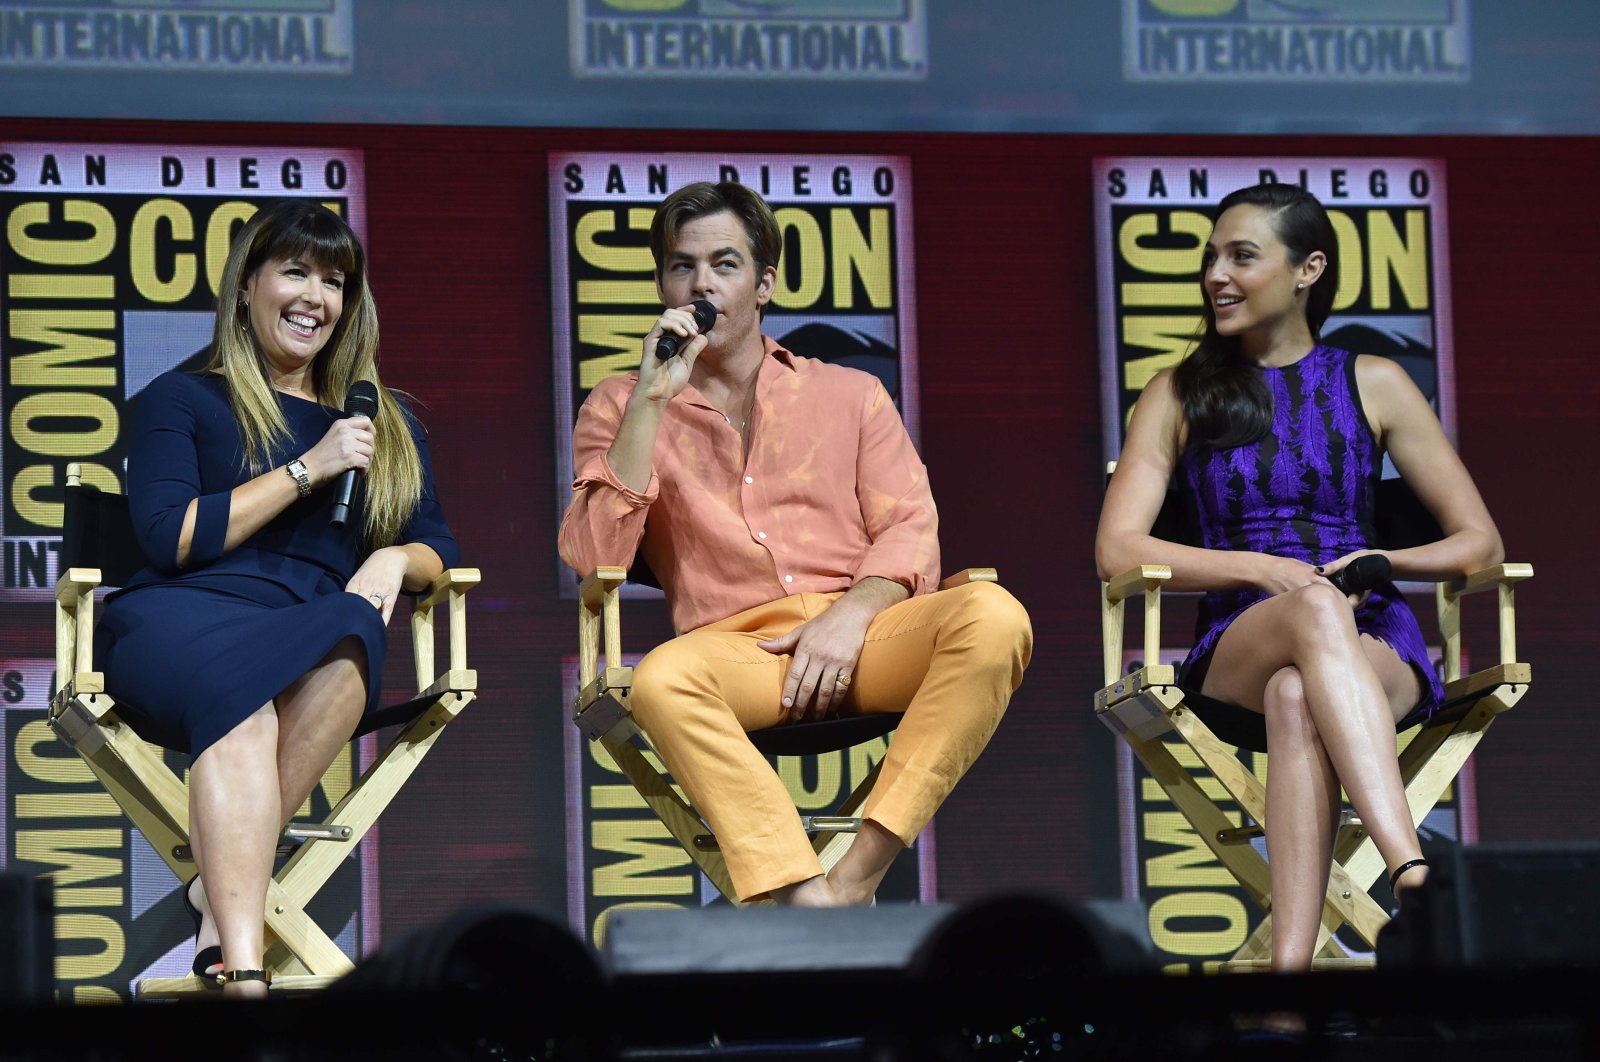 Director Patty Jenkins, and actors Chris Pine and Gal Gadot (L-R) participate in the Warner Bros. Theatrical Panel for "Wonder Woman 1984" during Comic Con in San Diego, July 21, 2018.  (AFP Photo)